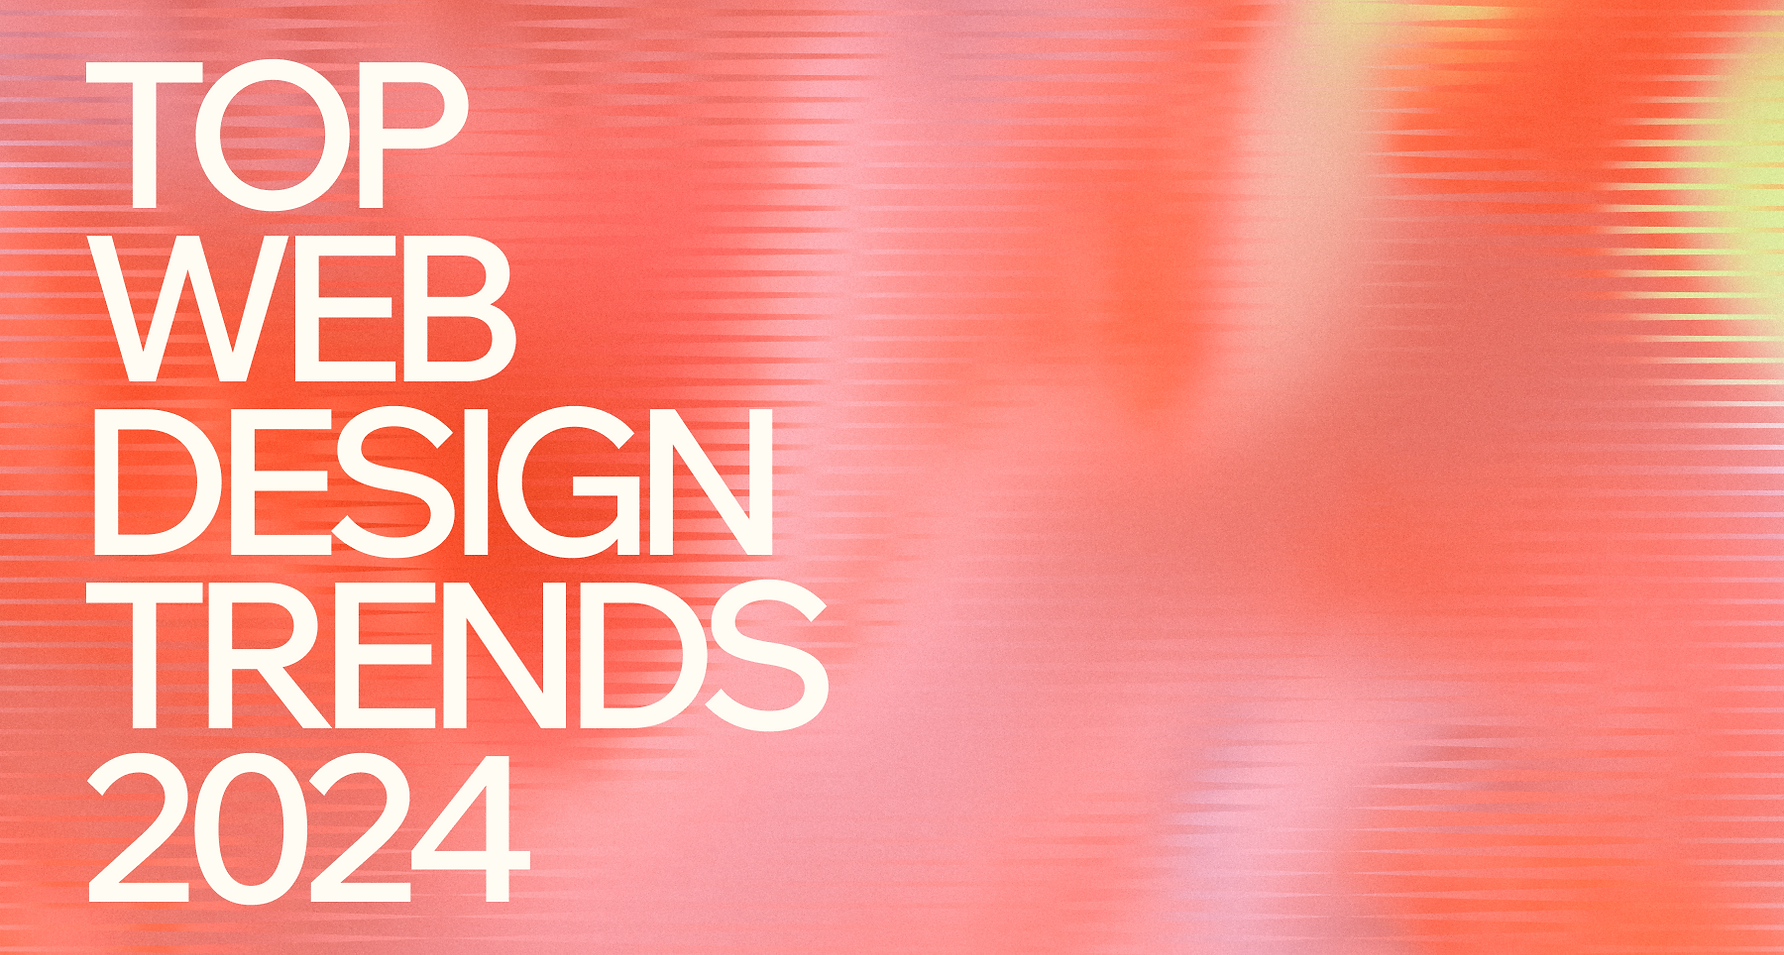 Top 10 Web Design Trends to Follow This Year 2024